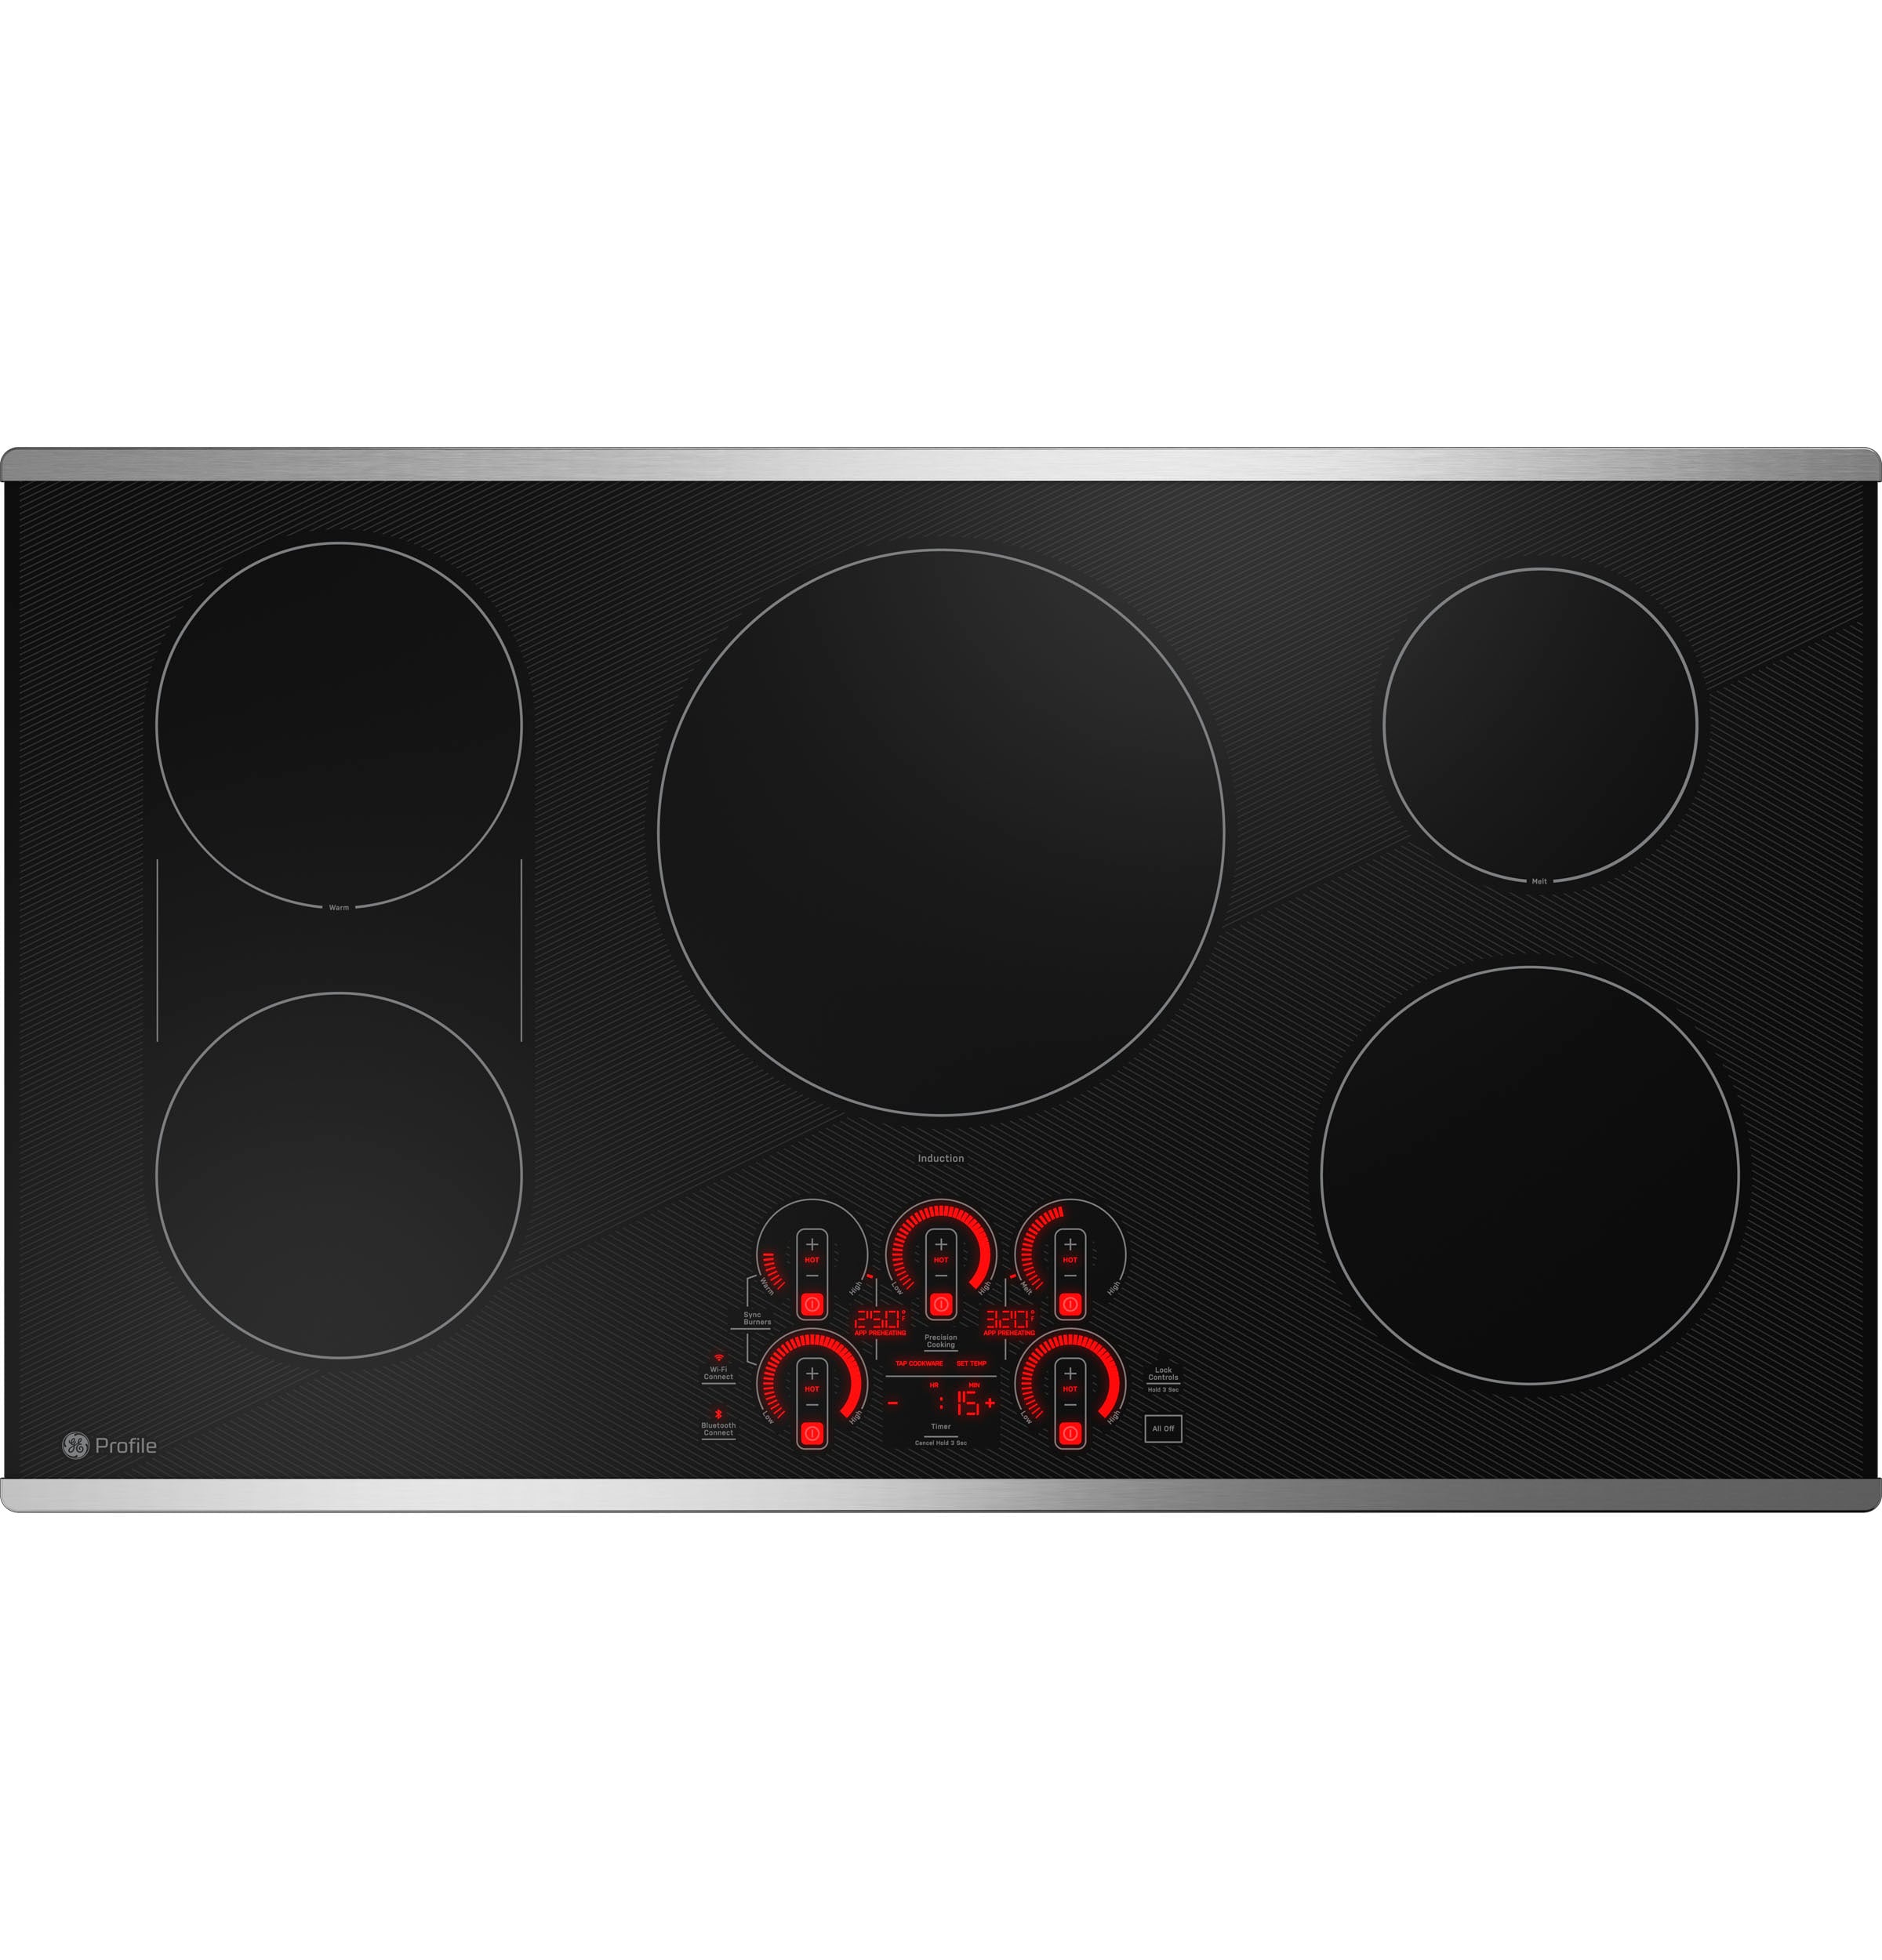 Commercial Induction Range Buying Guide